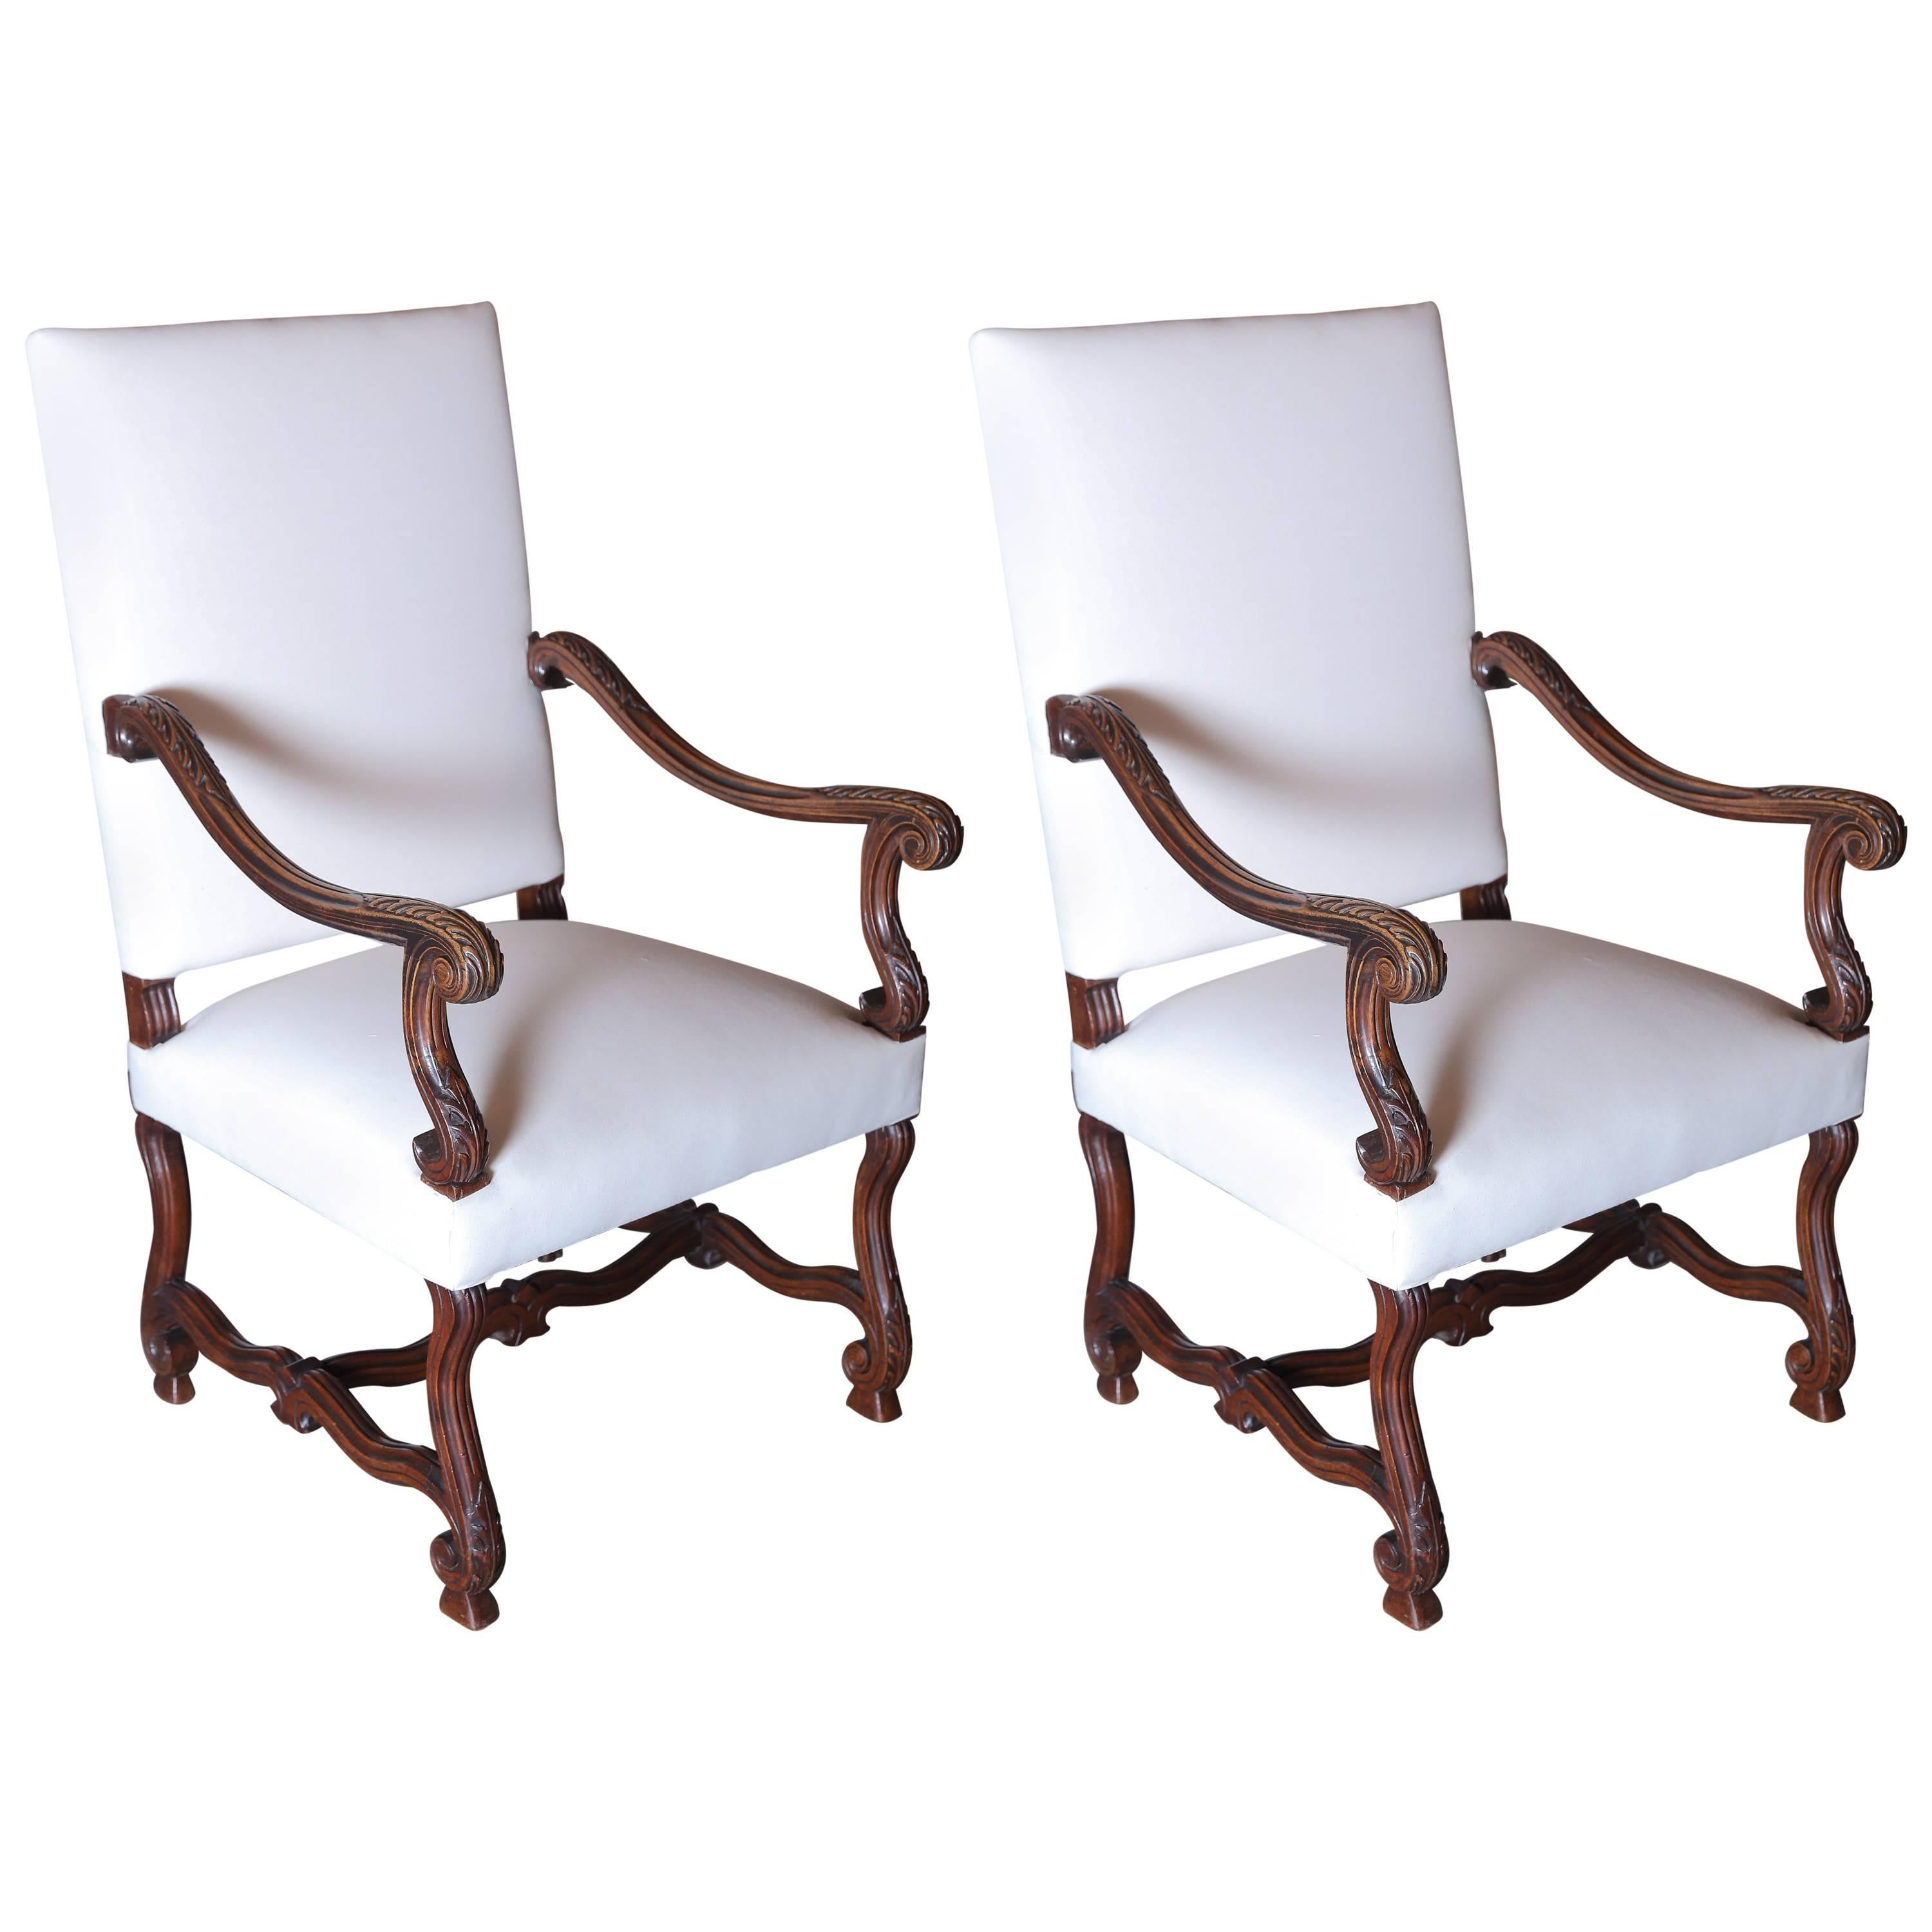 Pair of High Back French Chairs